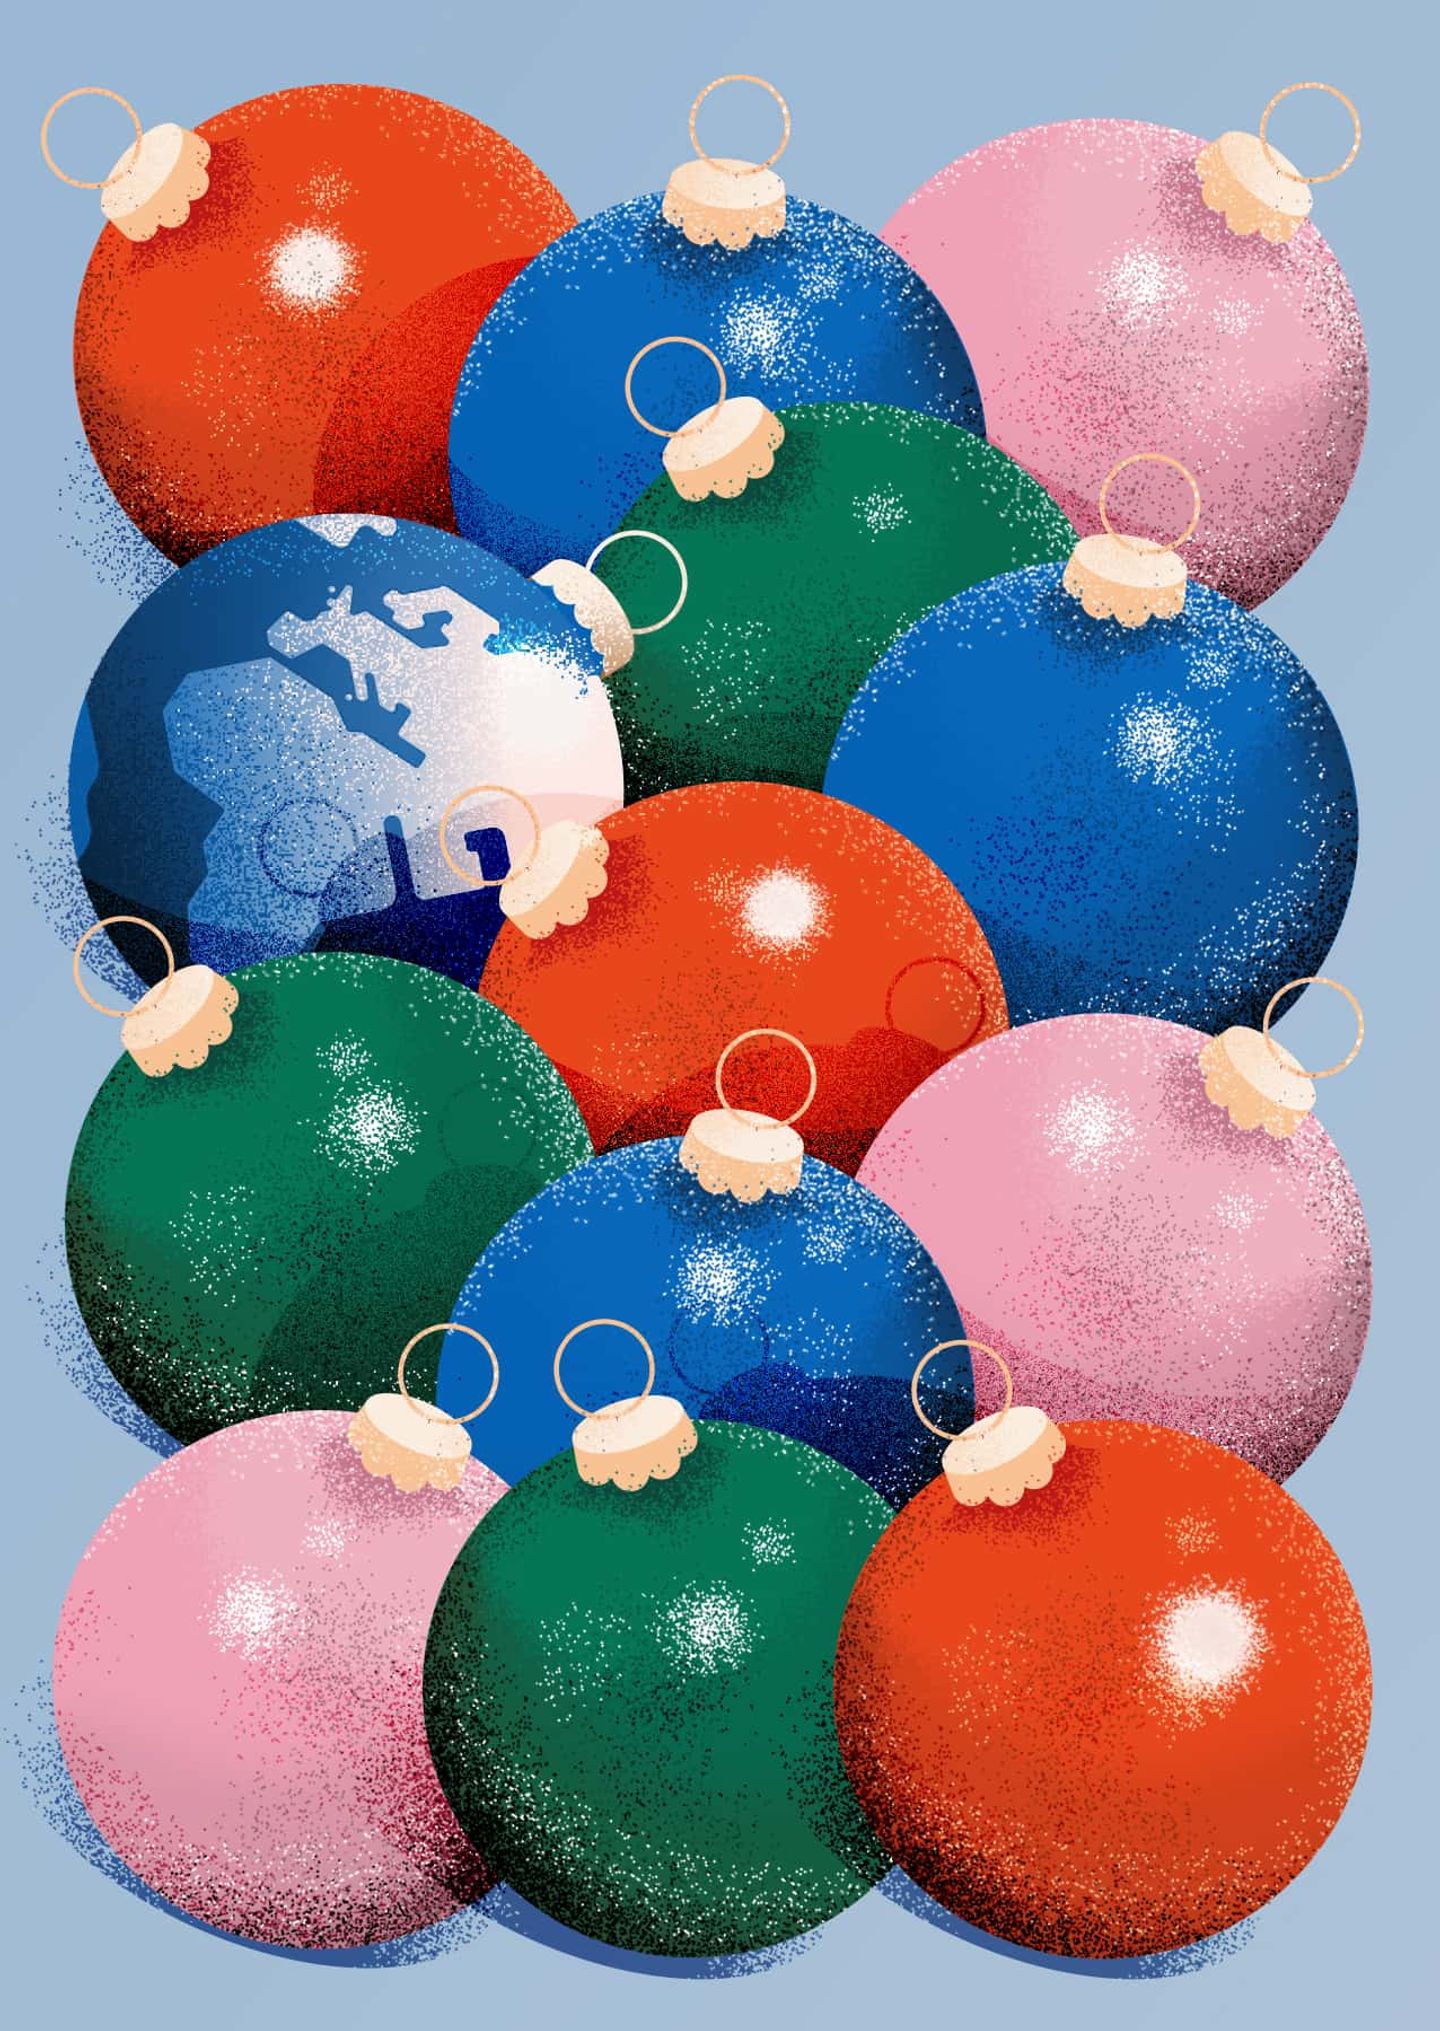 Various Christmas baubles and one has a world map depicted. 